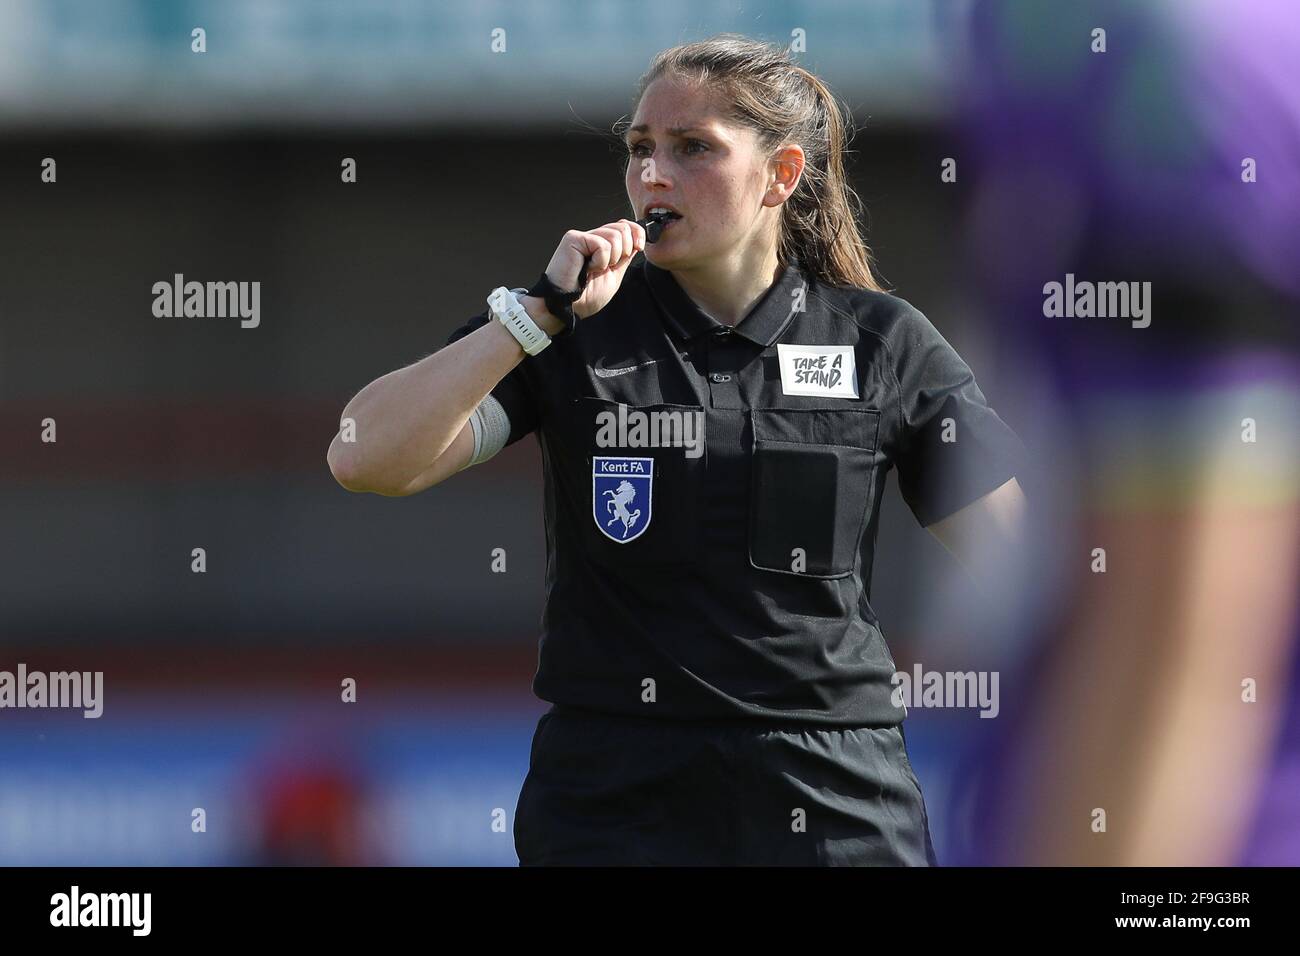 Crawley, UK. 18th April 2021. Referee, Louise Saunders during the Vitality Women's FA Cup match between Brighton & Hove Albion Women and Bristol City Women at The People's Pension Stadium on April 18th 2021 in Crawley, United Kingdom Stock Photo